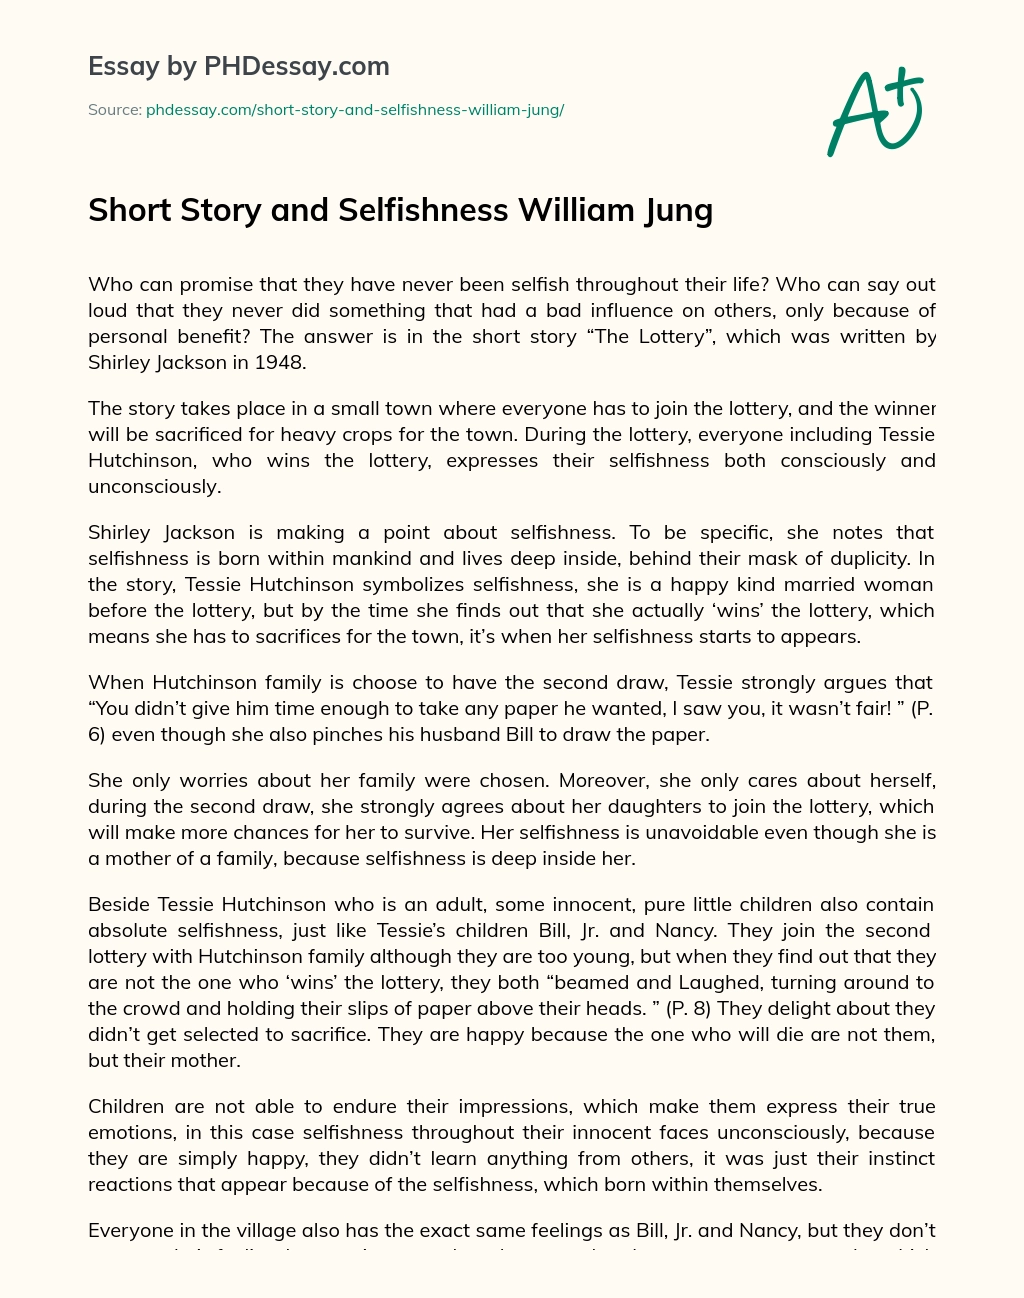 Short Story and Selfishness William Jung essay